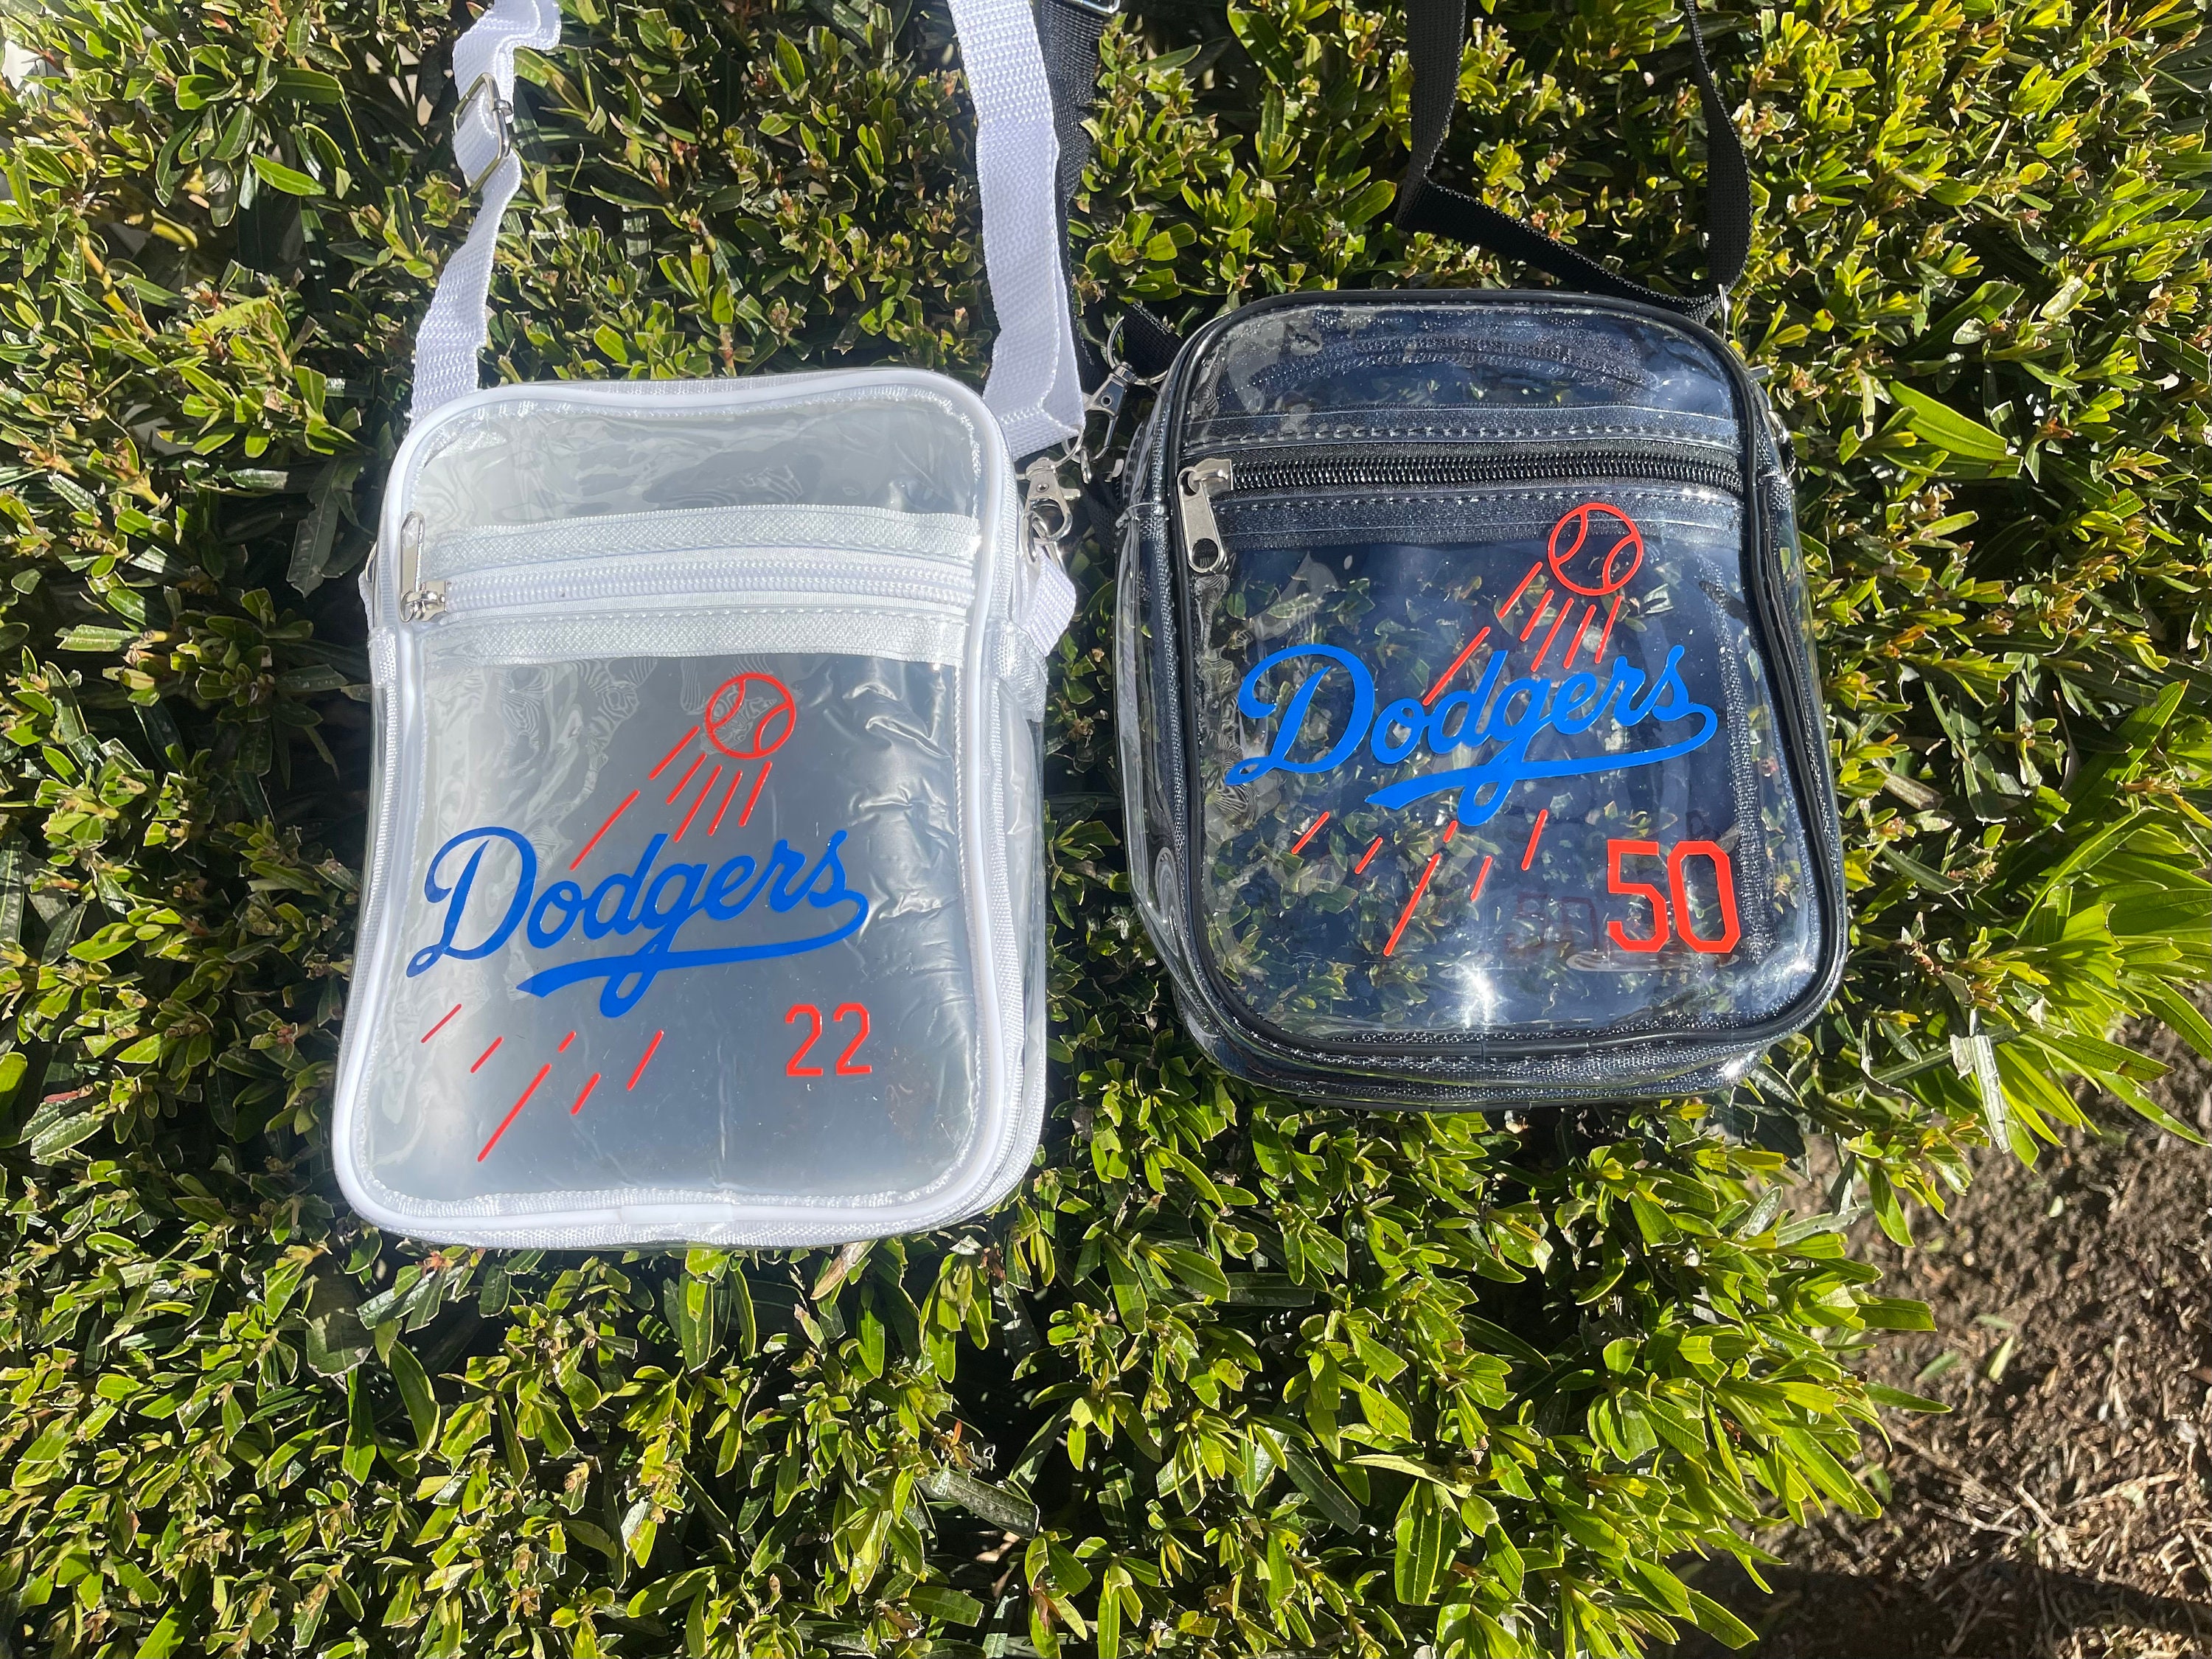  Dodgers Clear Bag